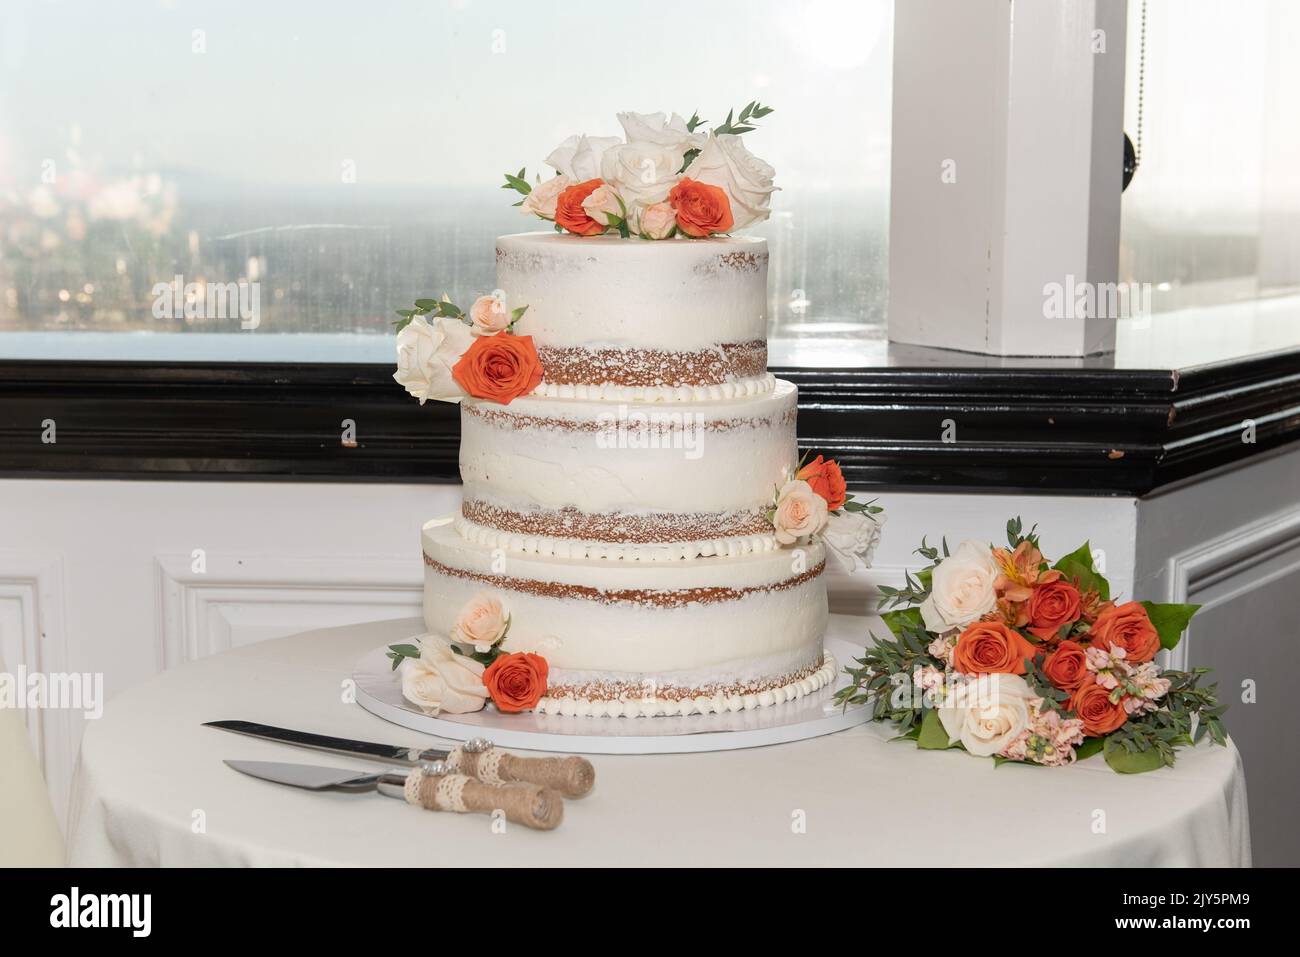 Triple layer wedding cake is set next to city view window along with serving set and bouquet of flowers. Stock Photo